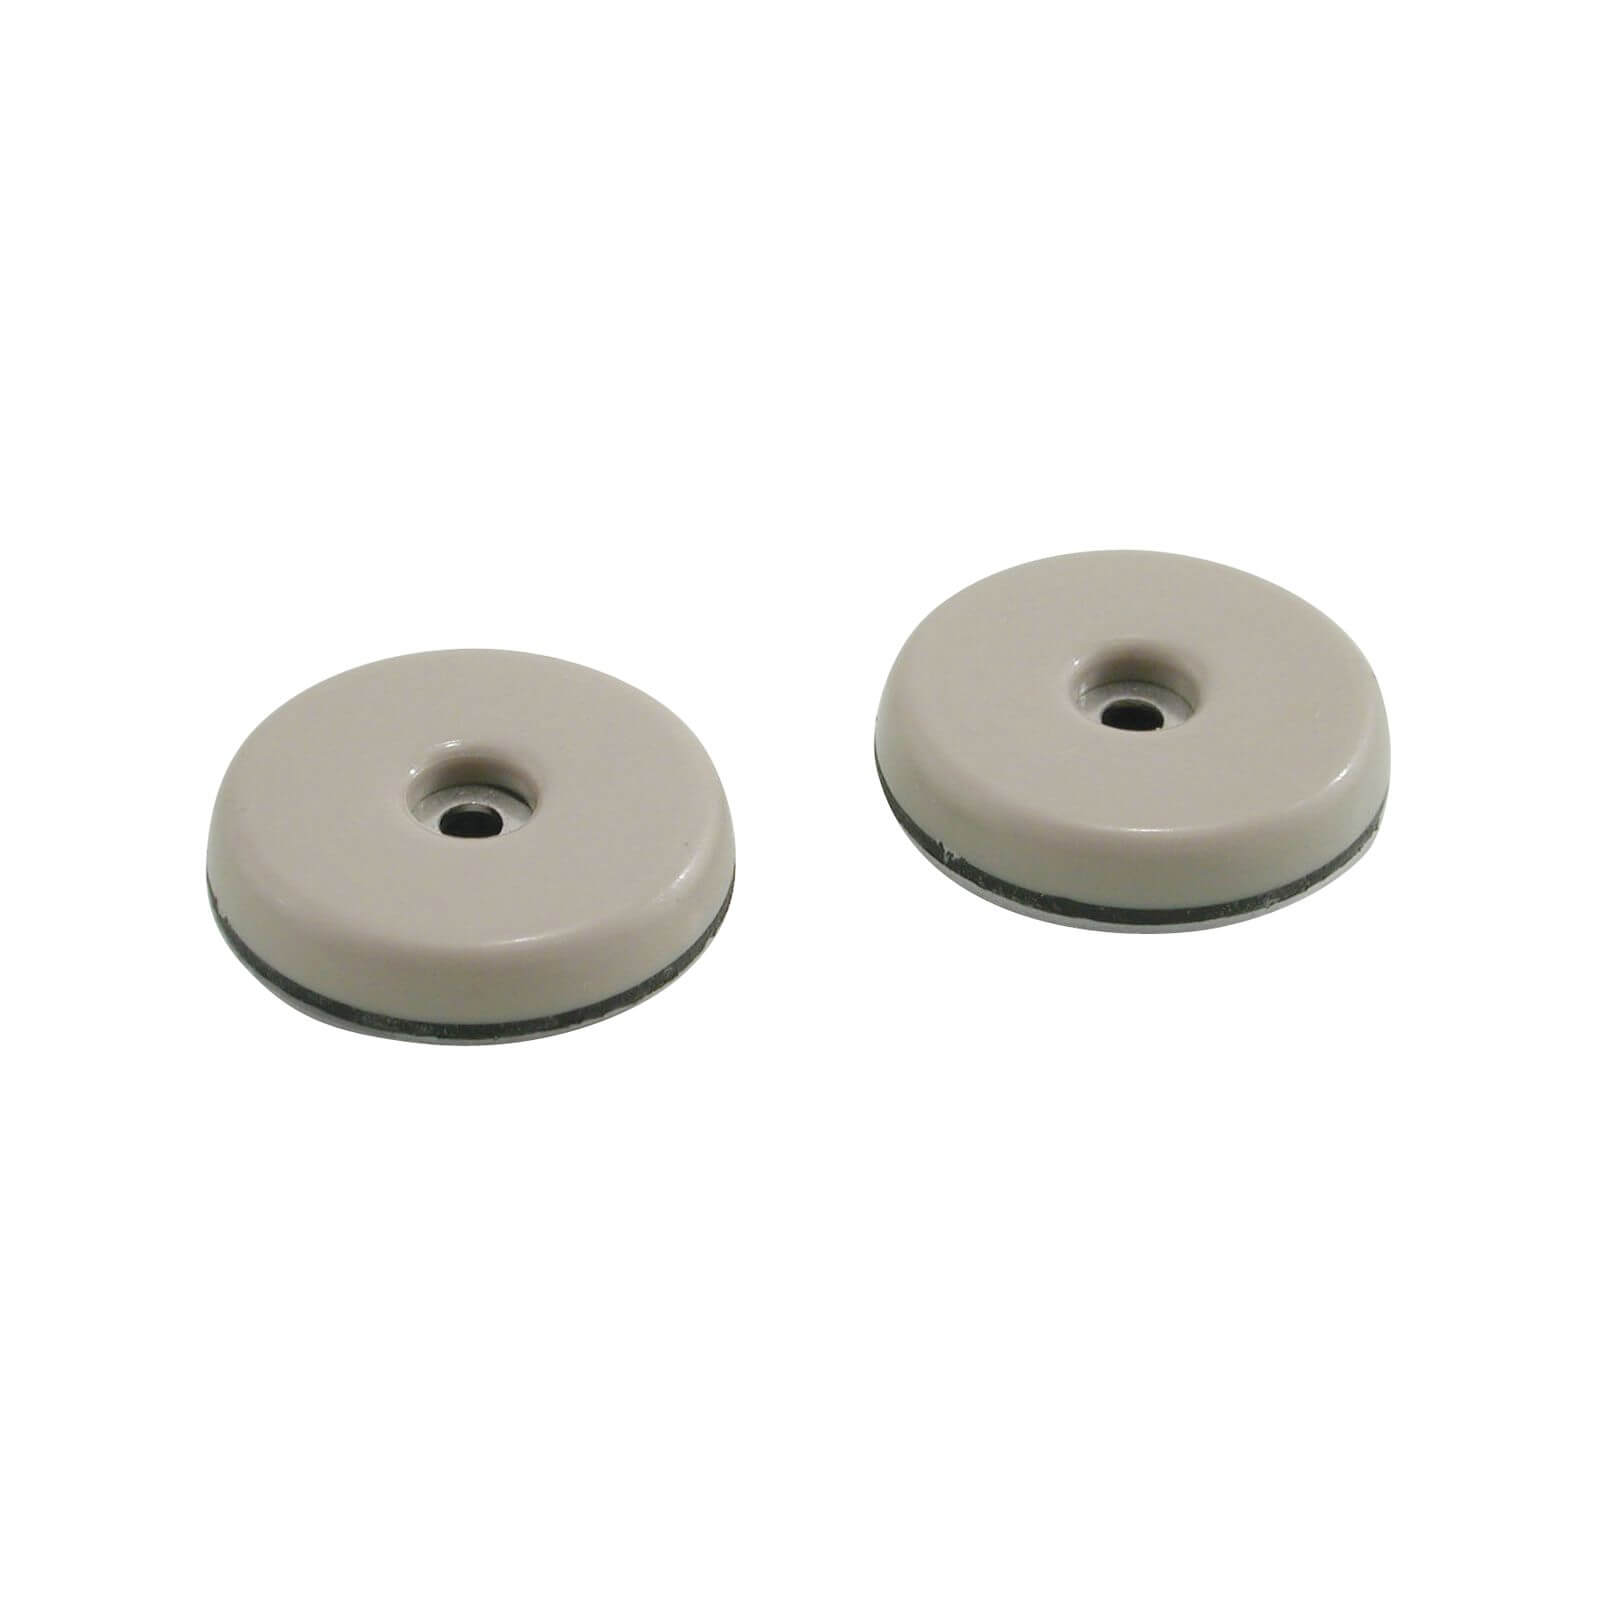 Photo of Furniture Movers - 38mm - 4 Pack